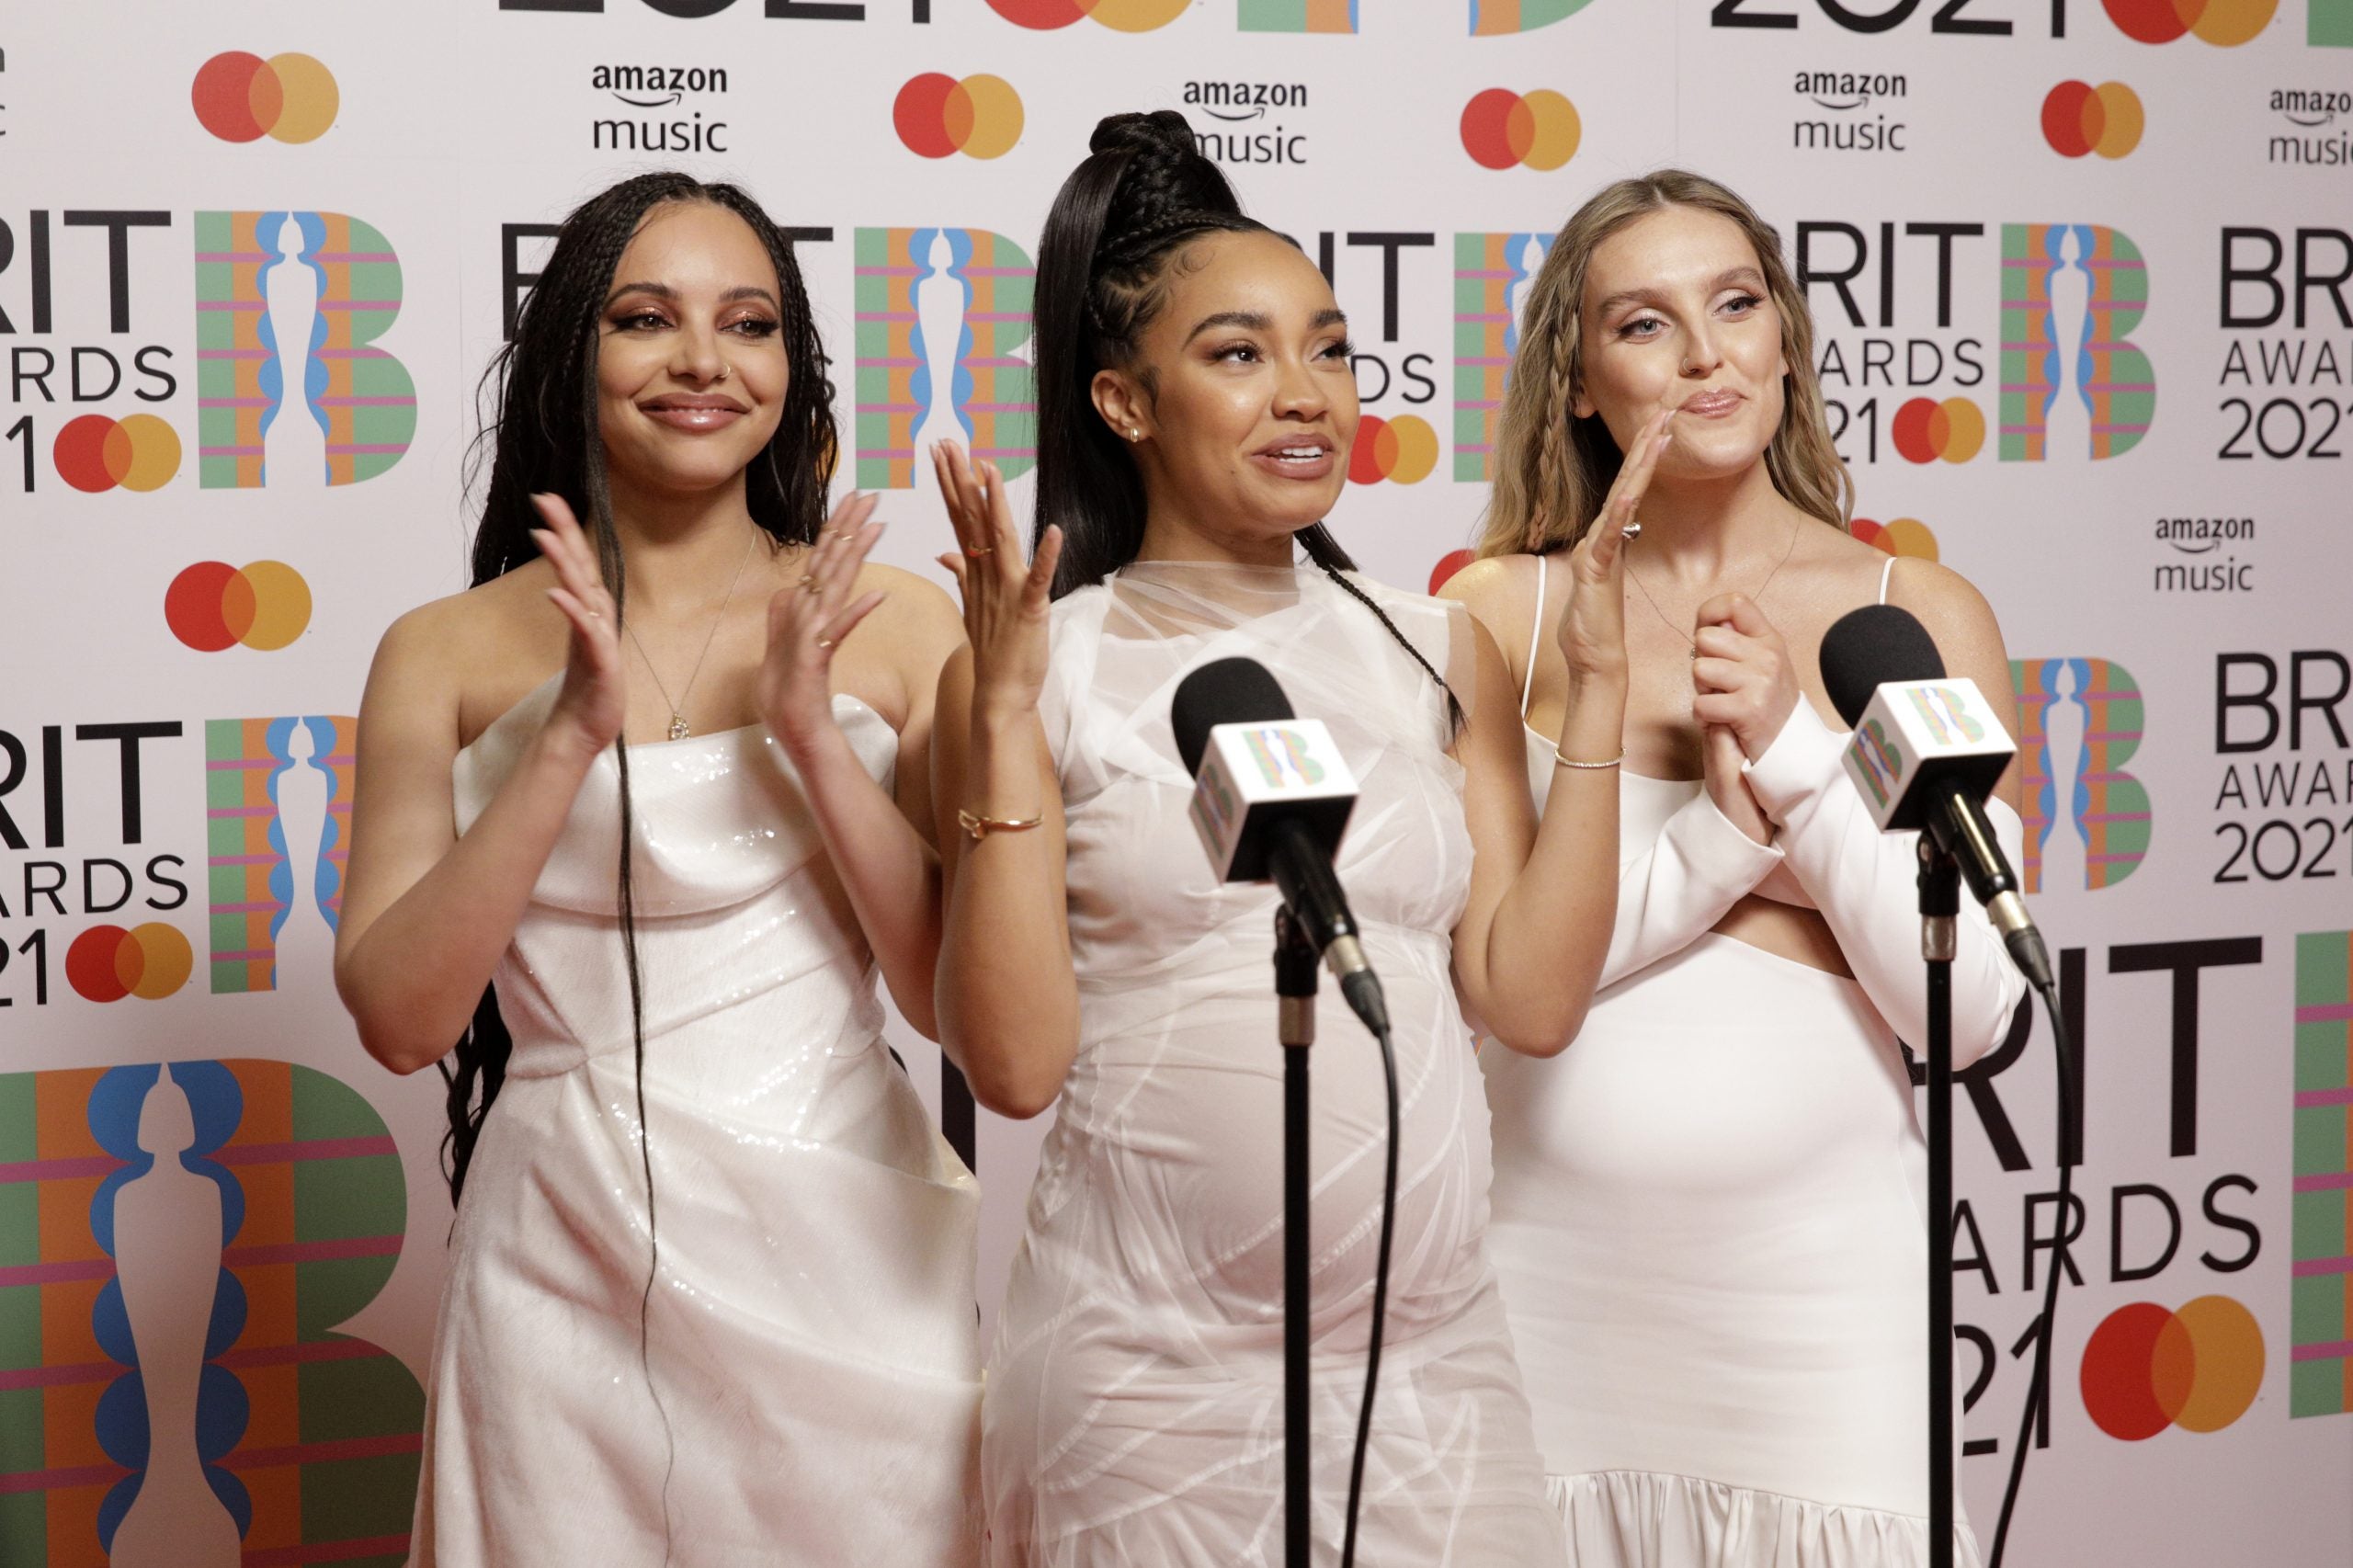 Little Mix Star Leigh-Ann Pinnock Surprises Fans By Revealing She's Given Birth To Twins